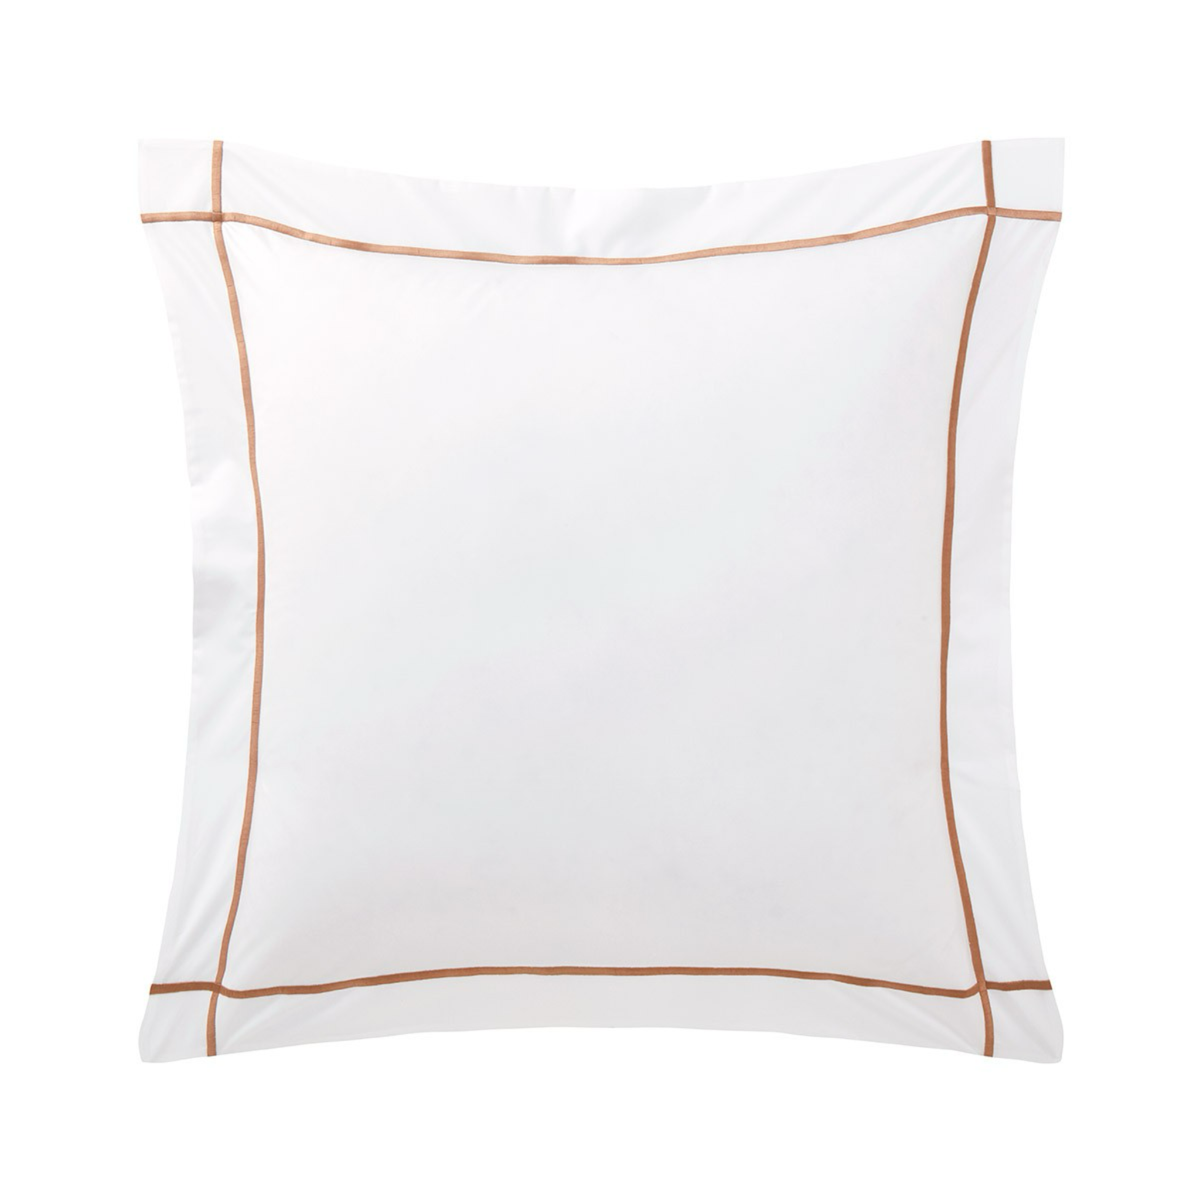 Euro Sham of Yves Delorme Athena Bedding in Sienna Color